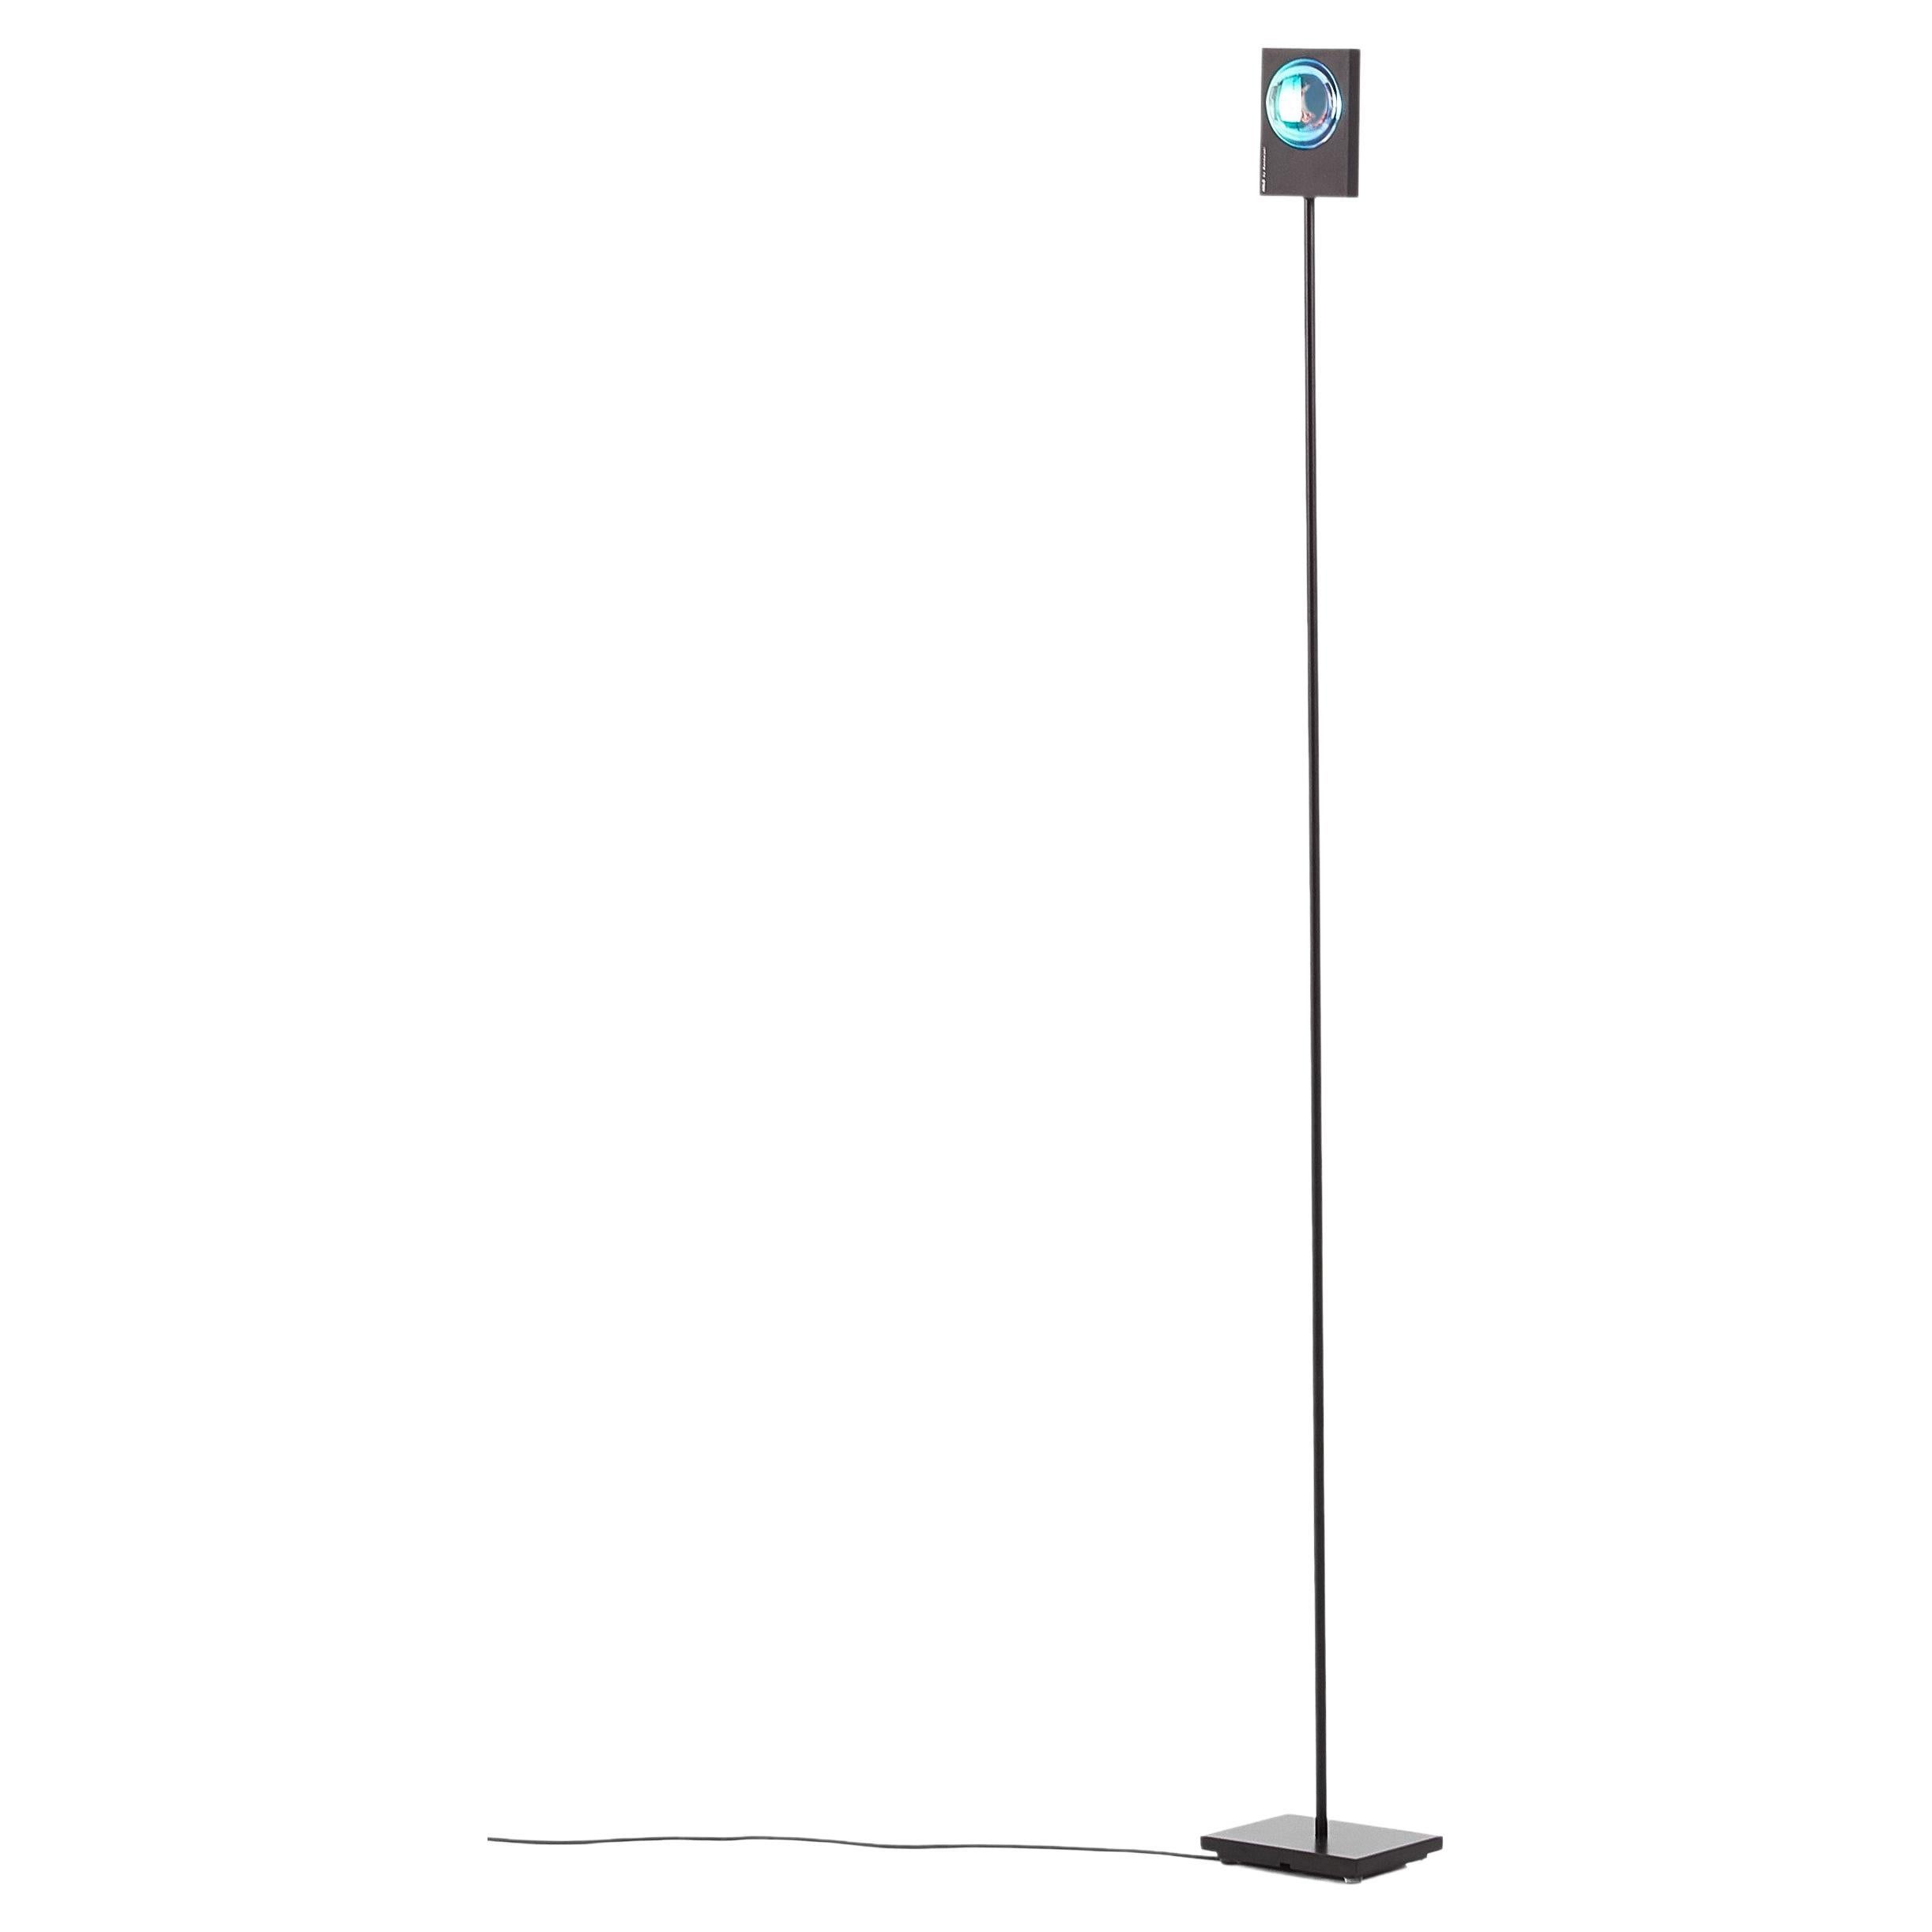 Deep blue Halo one floor lamp by Mandalaki
Dimensions: D 10 x W 13 x H 120 cm
Materials: Aluminium, brass, iron, glass
Available in other light color.

Weight: 3 Kg
Input: 100-240V 50-60Hz
Output: 12V DC
LED Power: 4W
Lumen: ~ 500